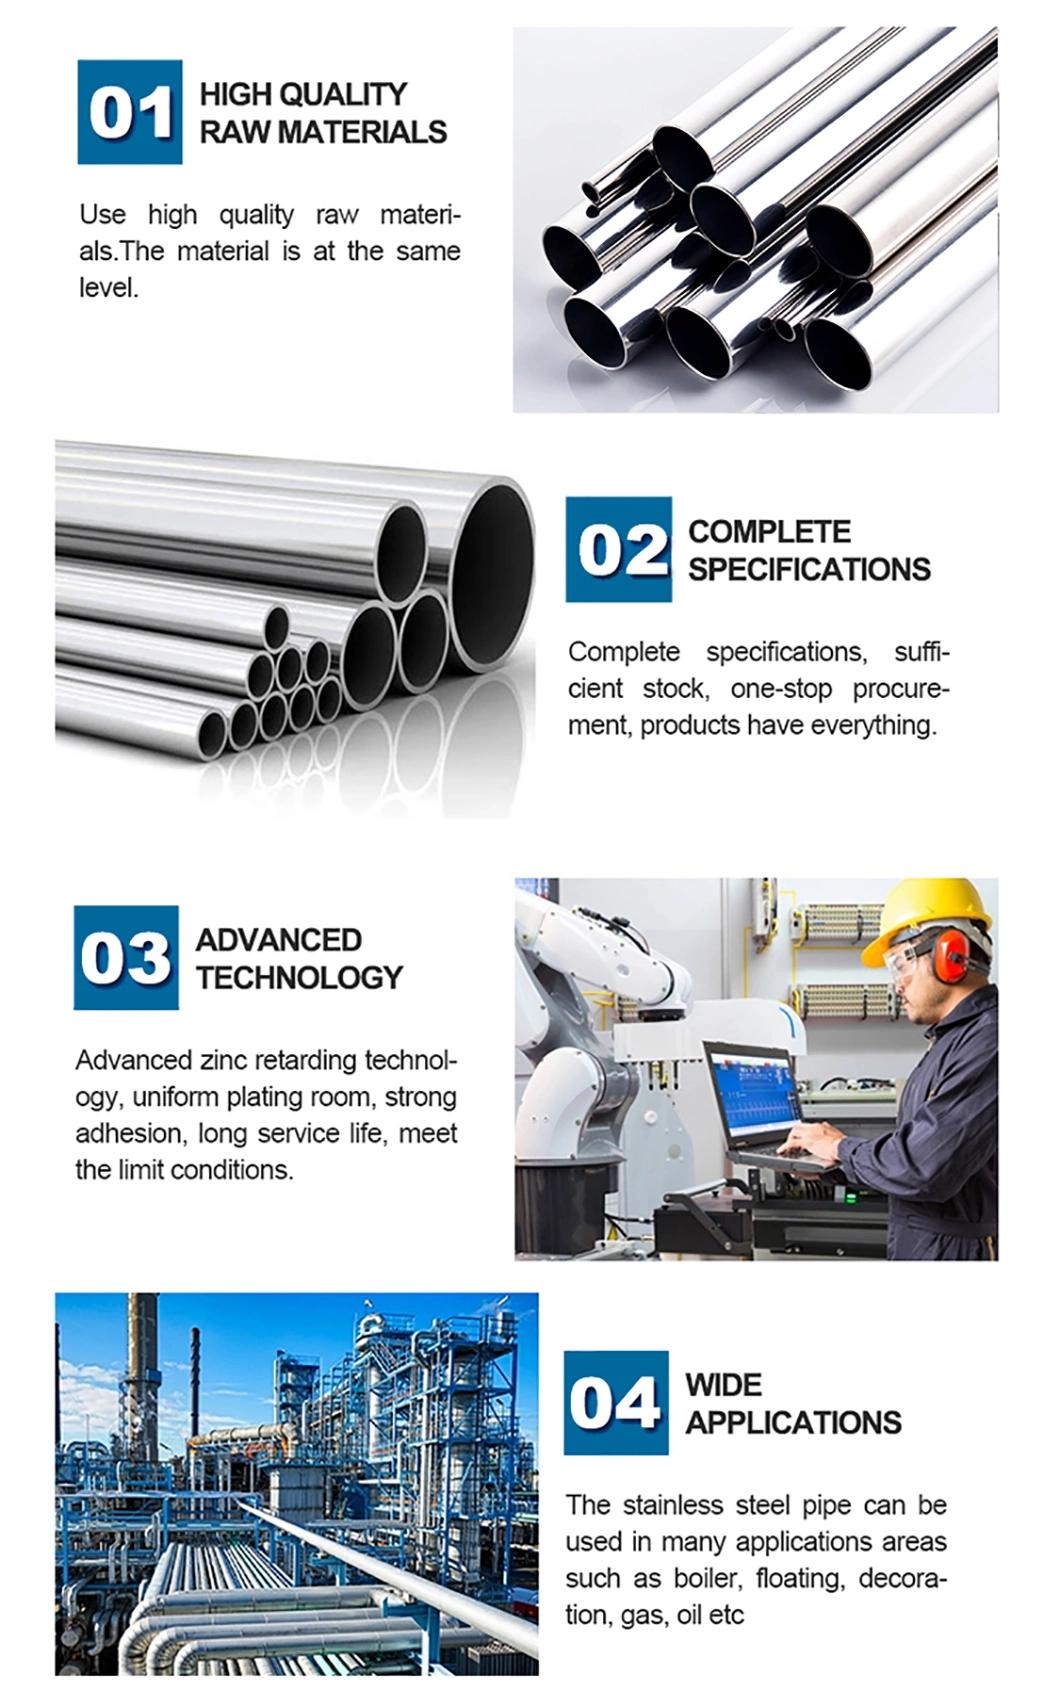 Best Price Stainless Steel S4300 Pipe Price